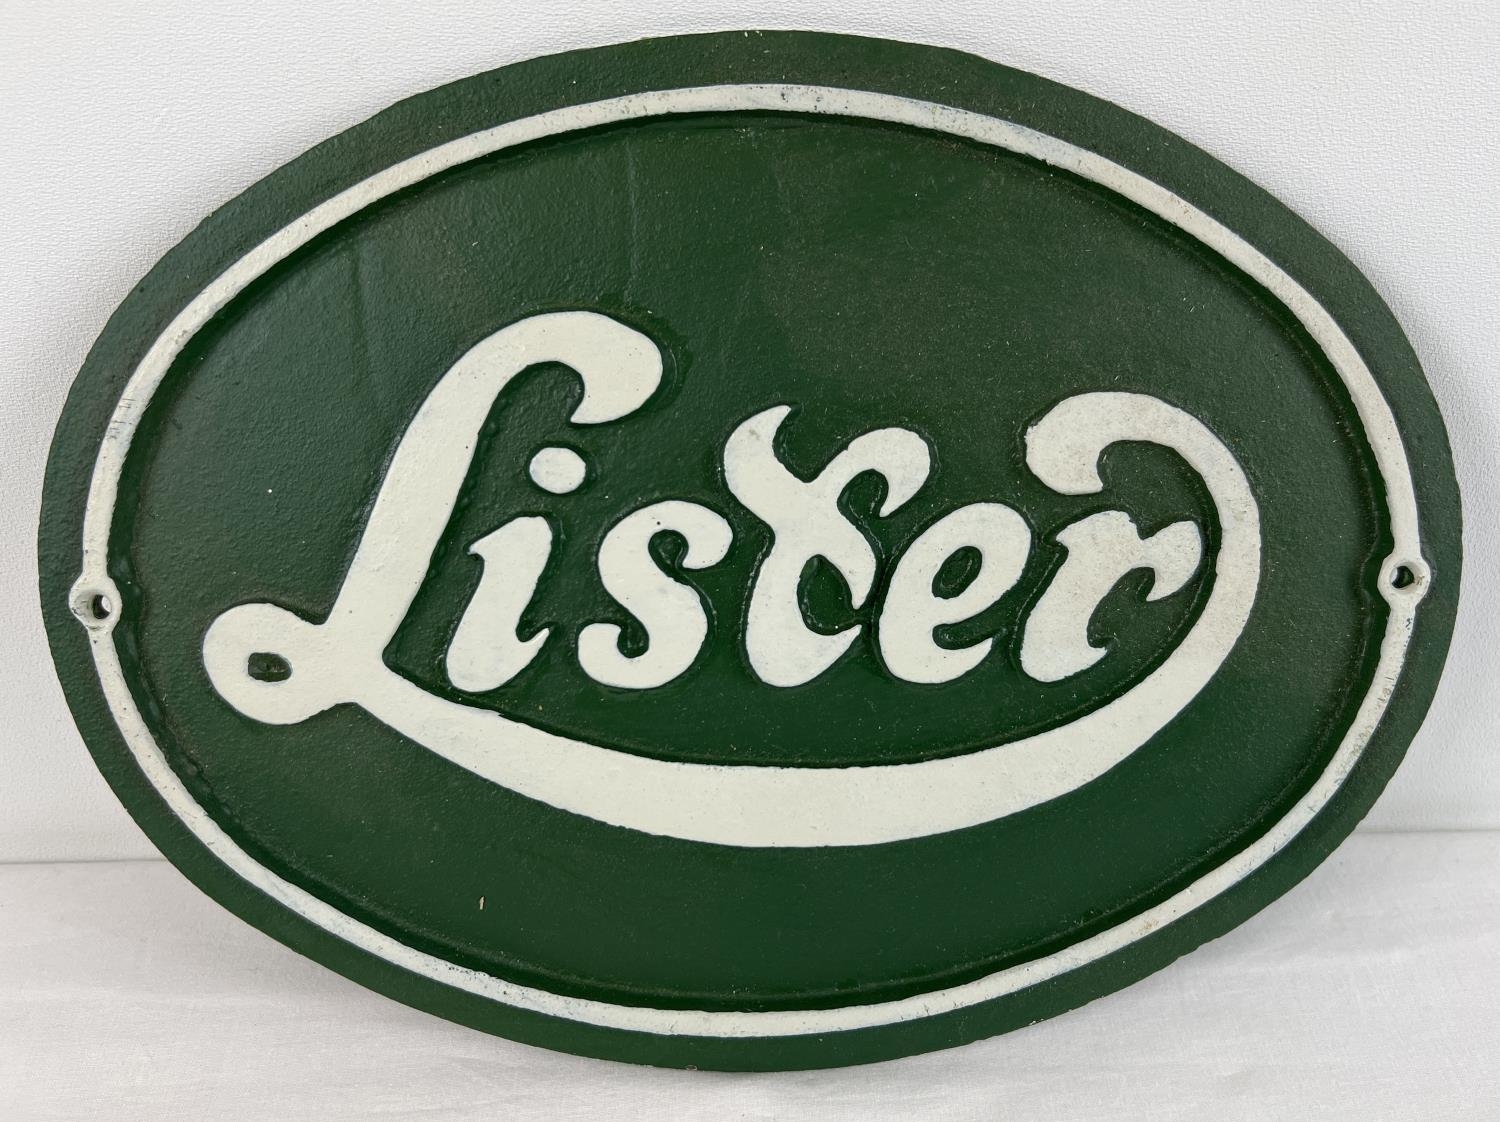 A green & white painted oval shaped cast iron wall plaque for Lister engines. With fixing holes.